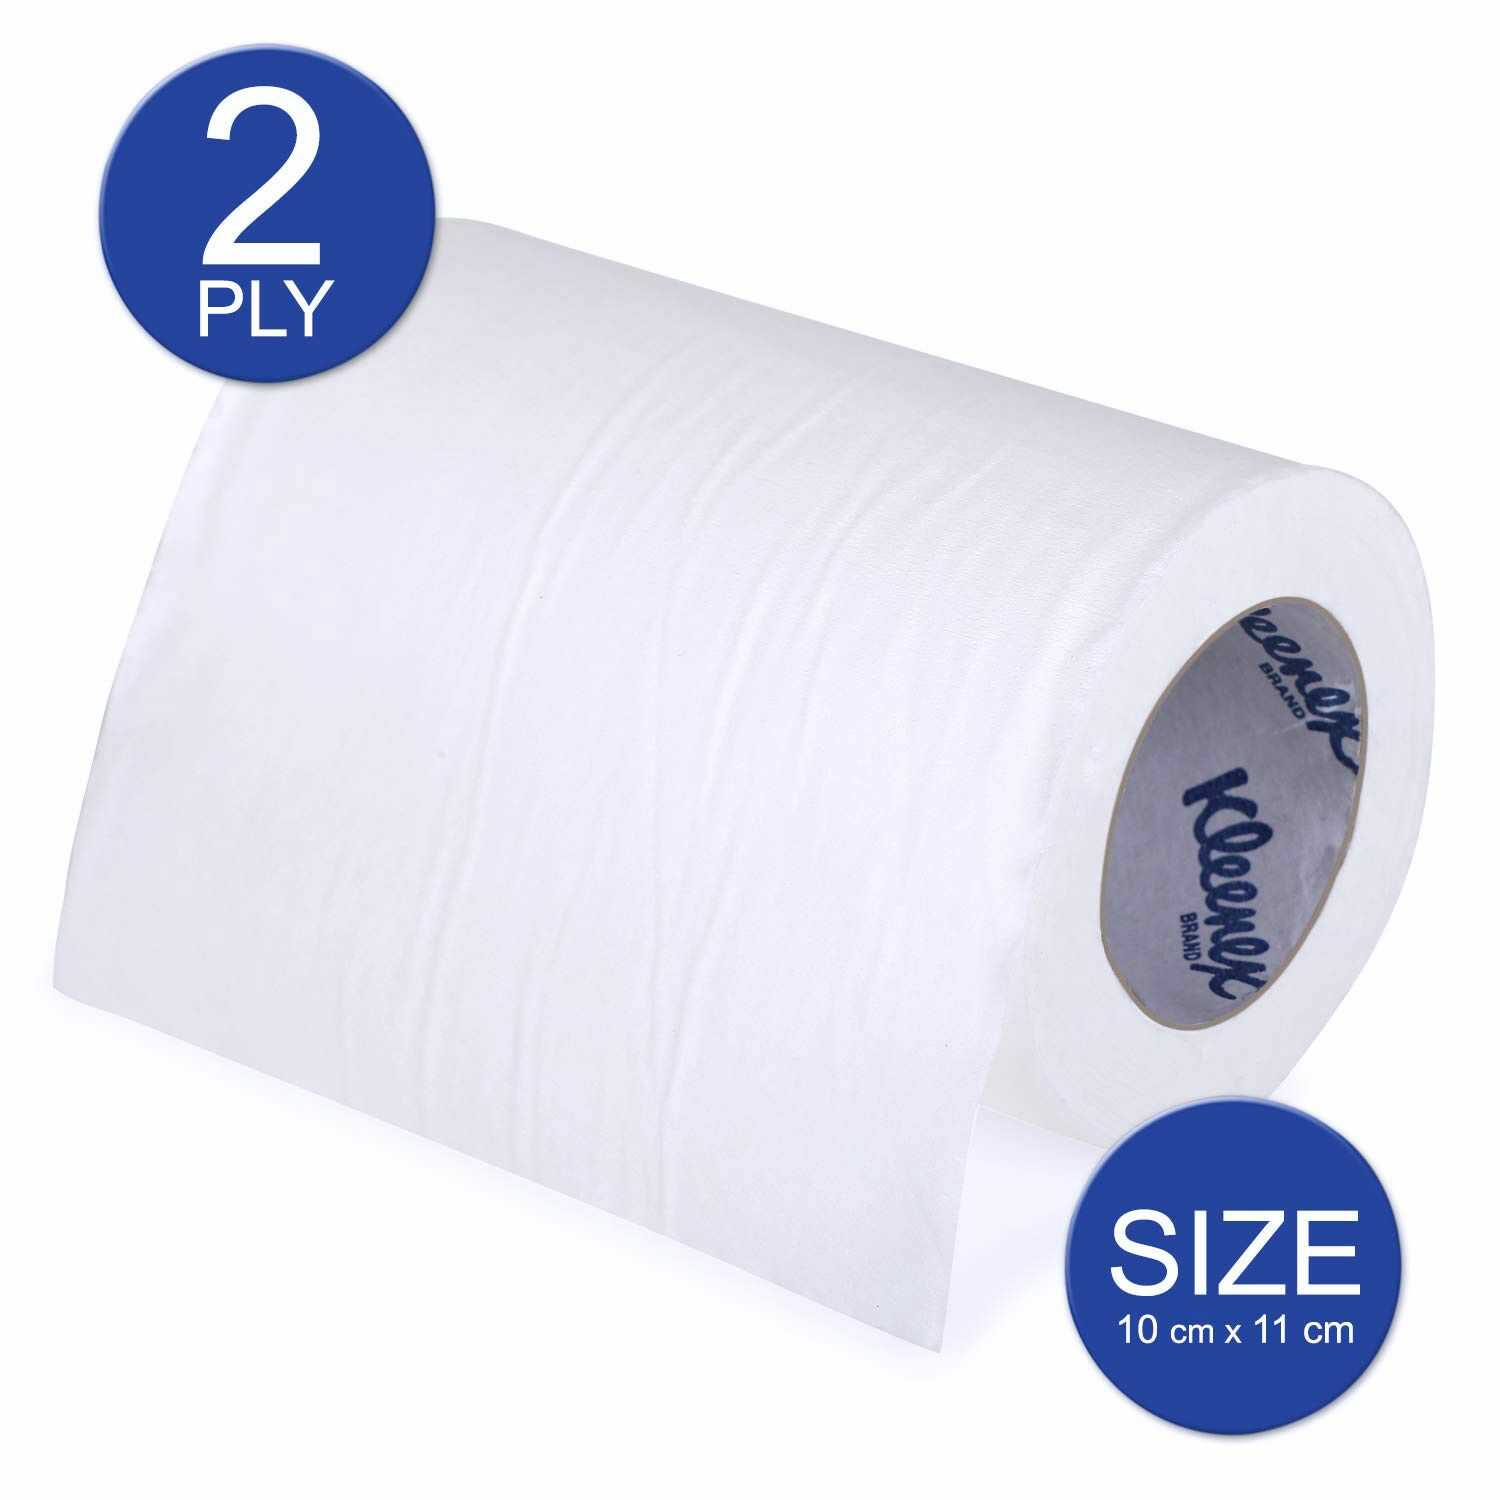 Kimberly Clark* Kleenex* Bathroom Tissue Roll, 1272 (Pack of 100 Rolls/Case, 200 Sheets/Pack, Total 20,000 Sheets )